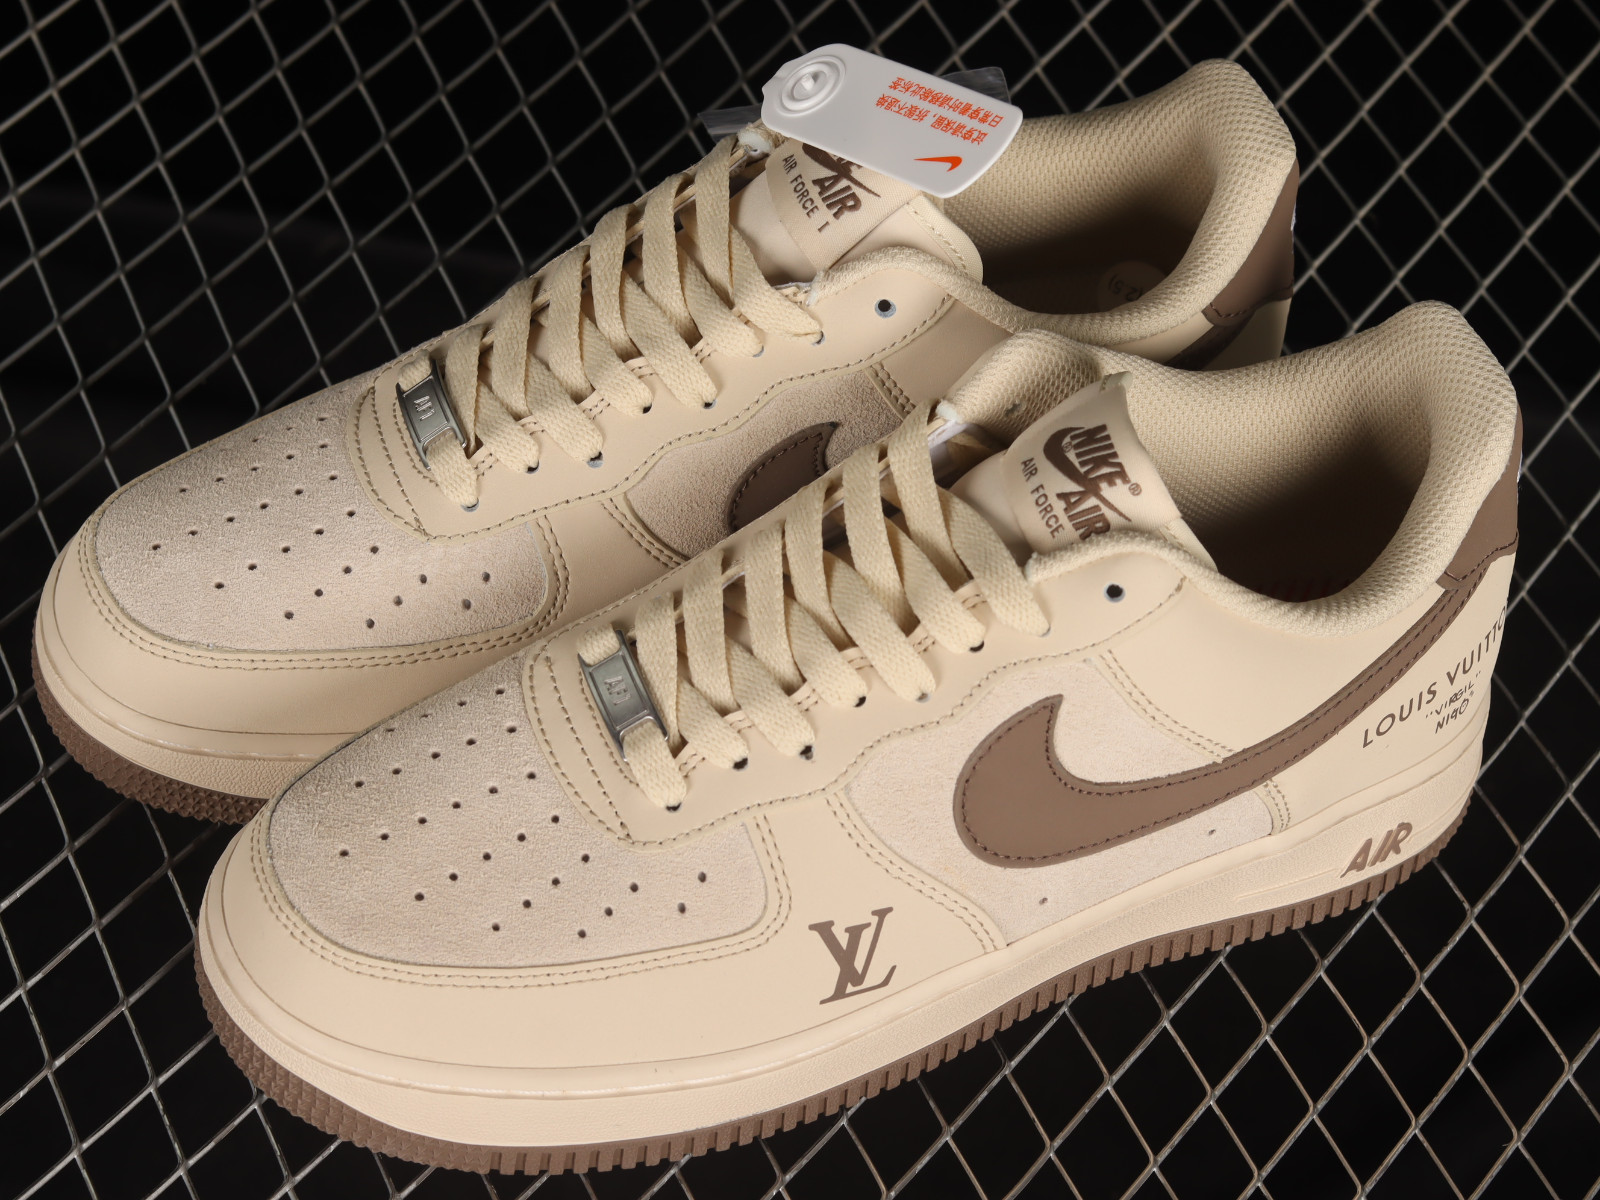 LV x Nike Air Force 1 07 Low Brown Cream White BS6055 - 301 -  MultiscaleconsultingShops - Nike SB Dunk Low Bred